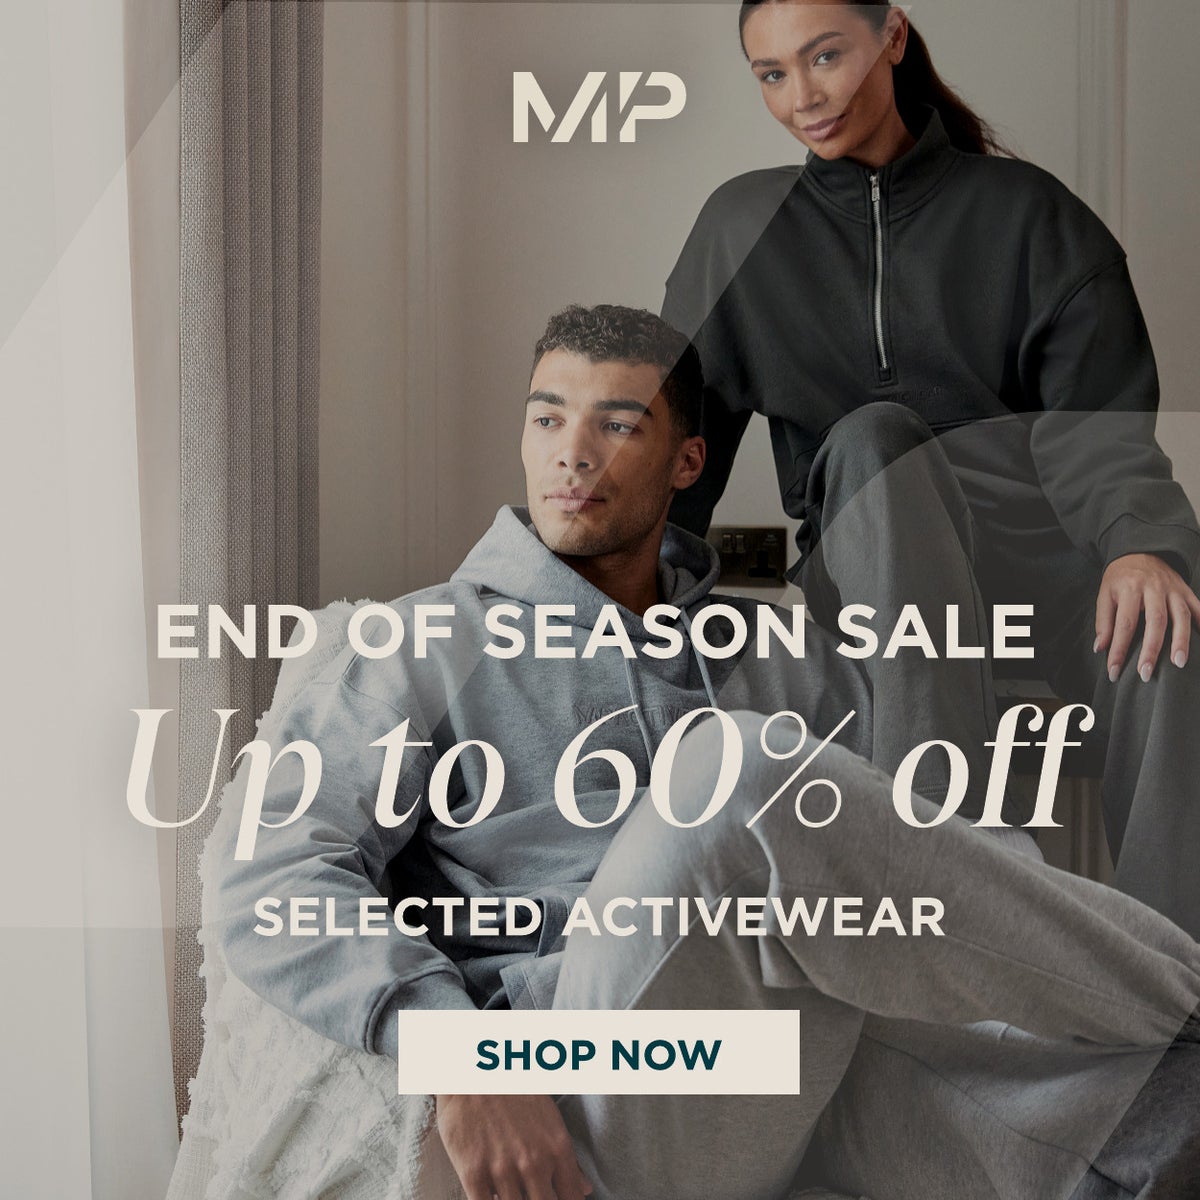 Activewear up to 60% off